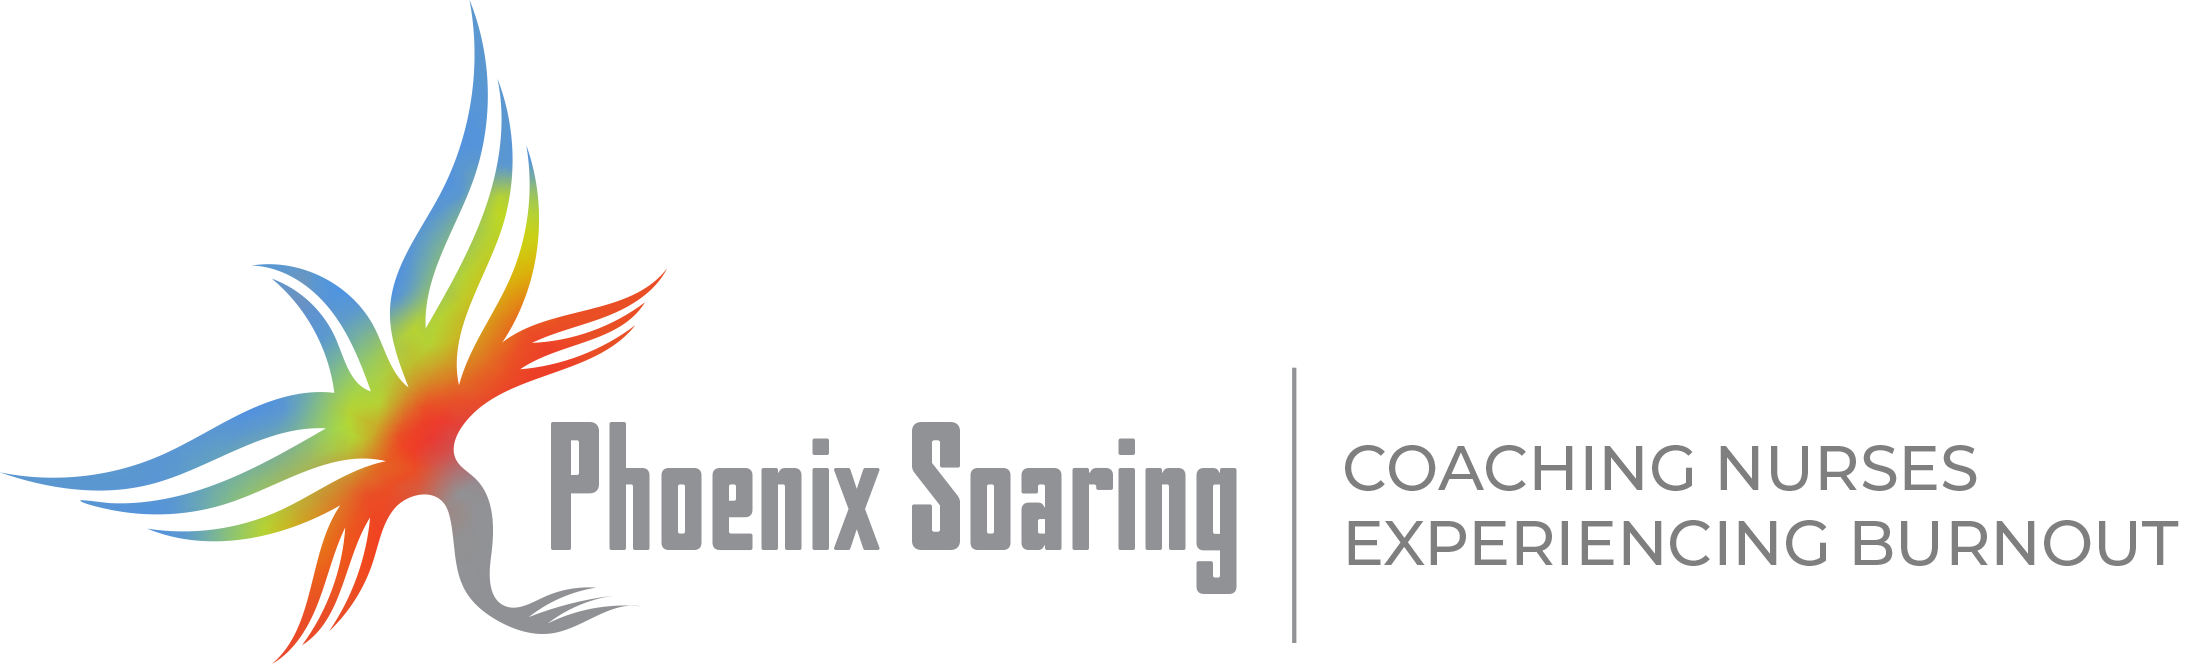 The logo of Phoenix soaring with transparent background